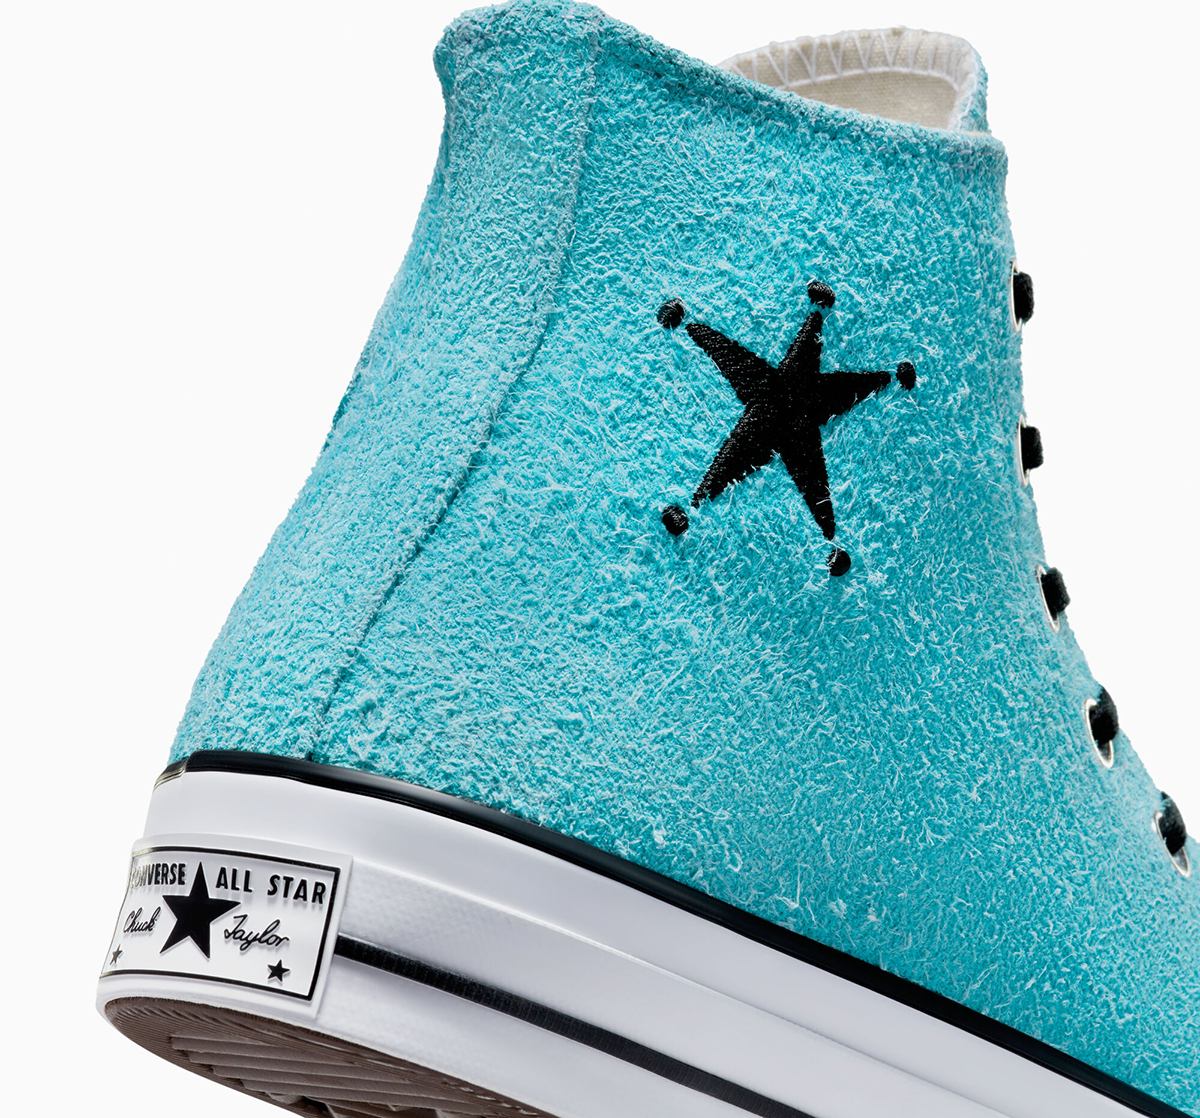 Stussy Converse Chuck Taylor All Star Canvas Shoes Leisure Wear-resistant Non-Slip High Tops 155457C Sky Blue A07663c 9